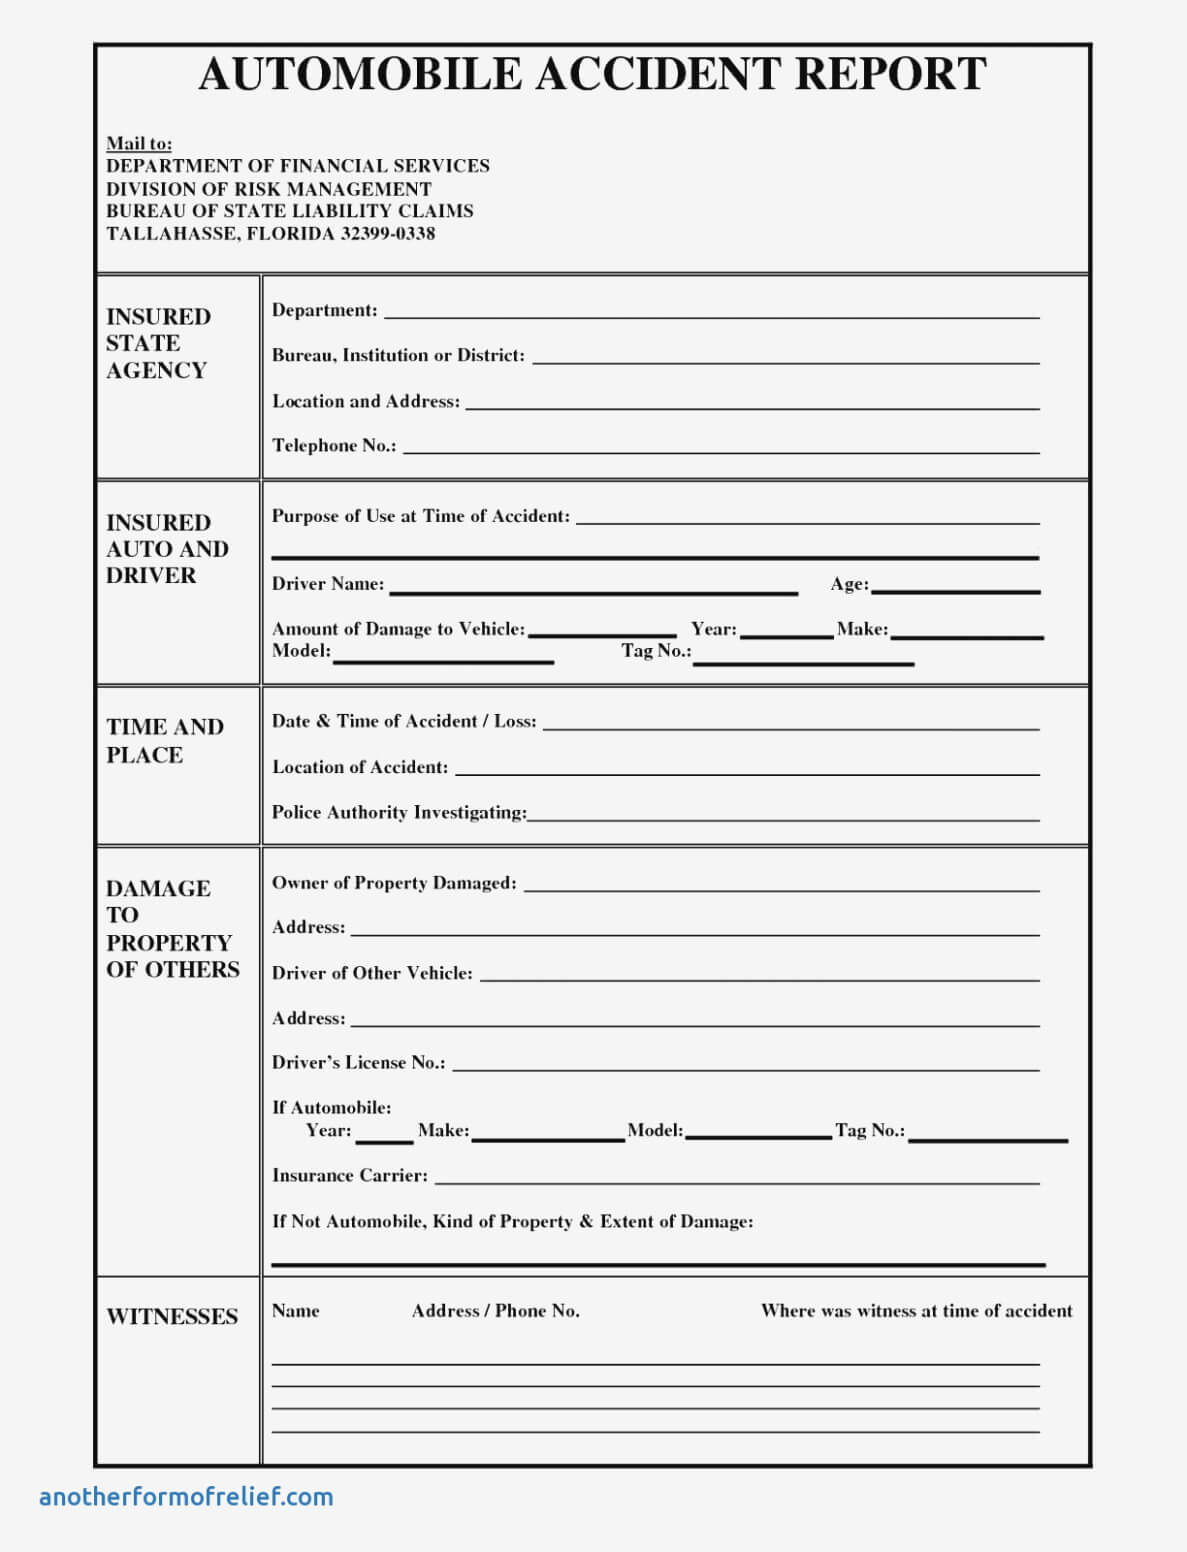 Auto Accident Report Form Income Tax Employee Template Intended For Vehicle Accident Report Template